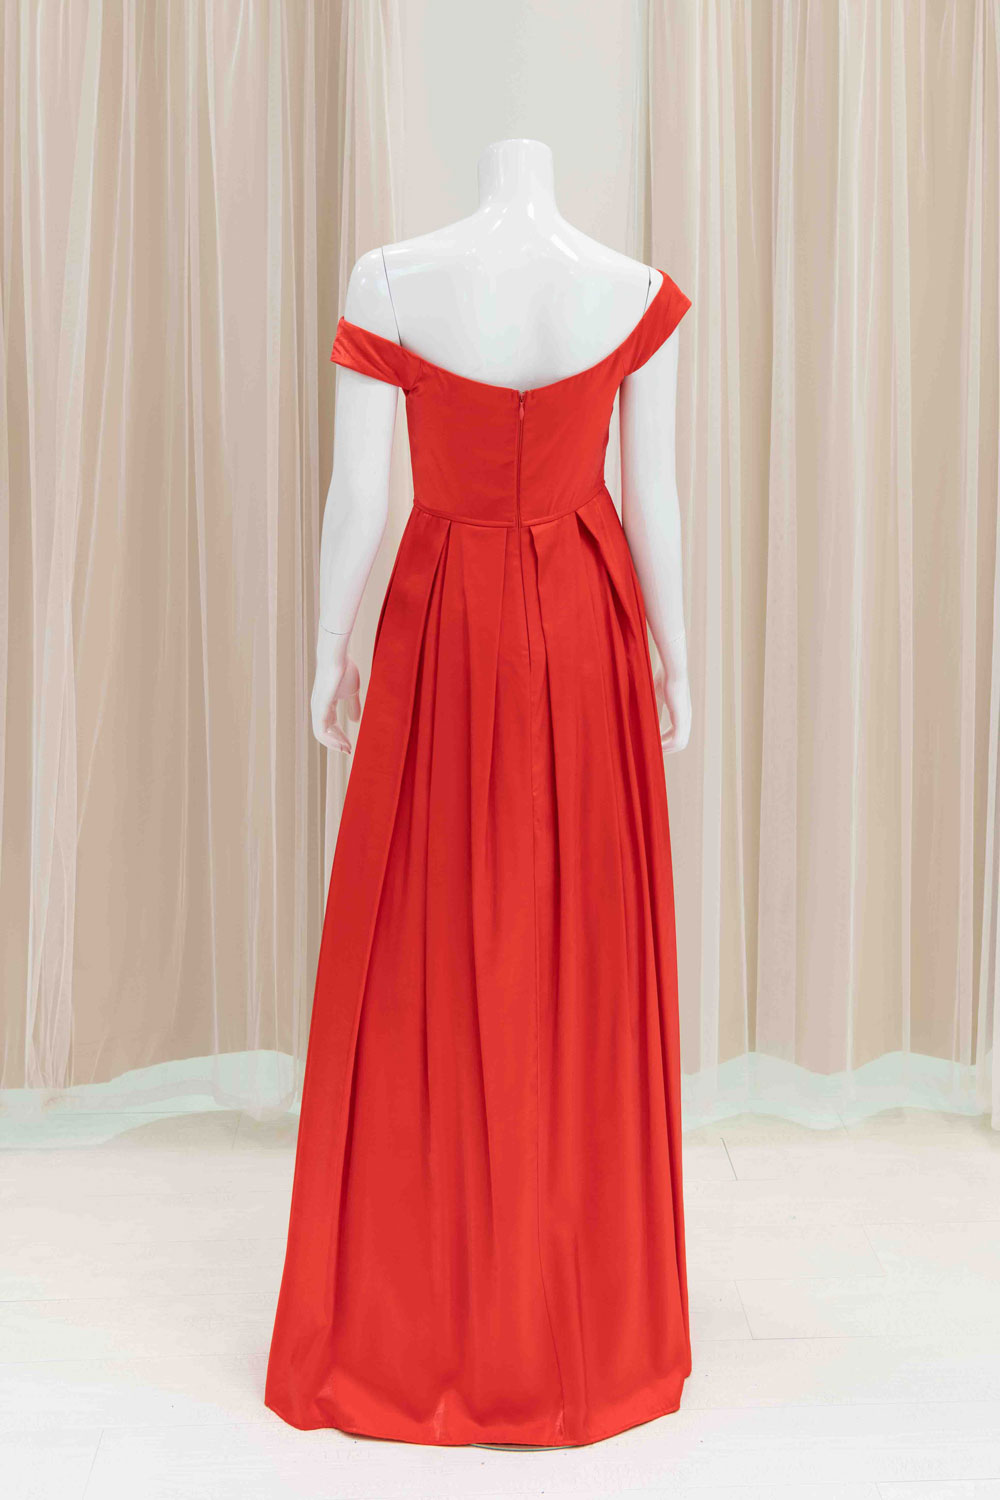 Simple Prom Dress in Red